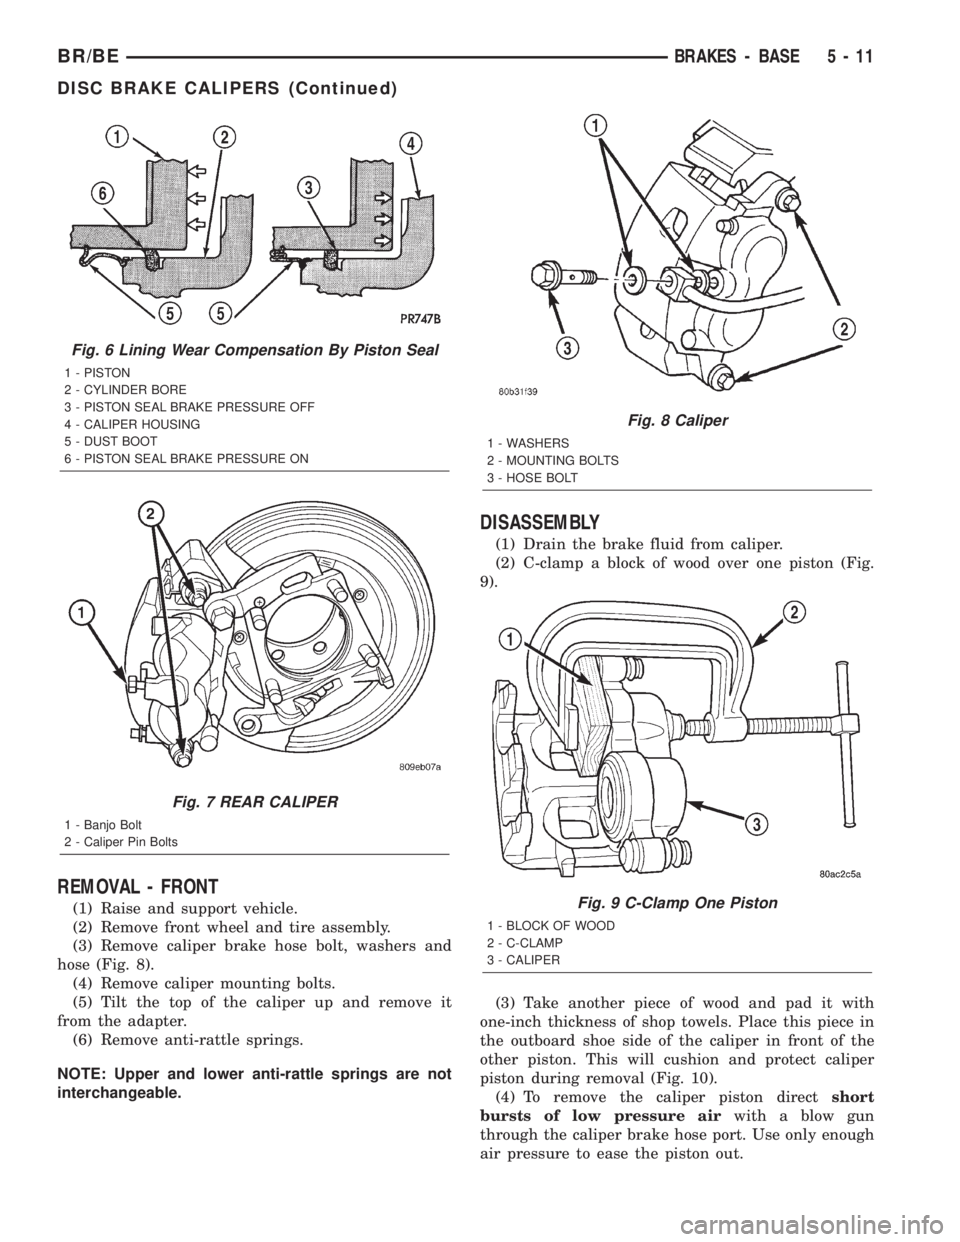 DODGE RAM 2002  Service Repair Manual REMOVAL - FRONT
(1) Raise and support vehicle.
(2) Remove front wheel and tire assembly.
(3) Remove caliper brake hose bolt, washers and
hose (Fig. 8).
(4) Remove caliper mounting bolts.
(5) Tilt the 